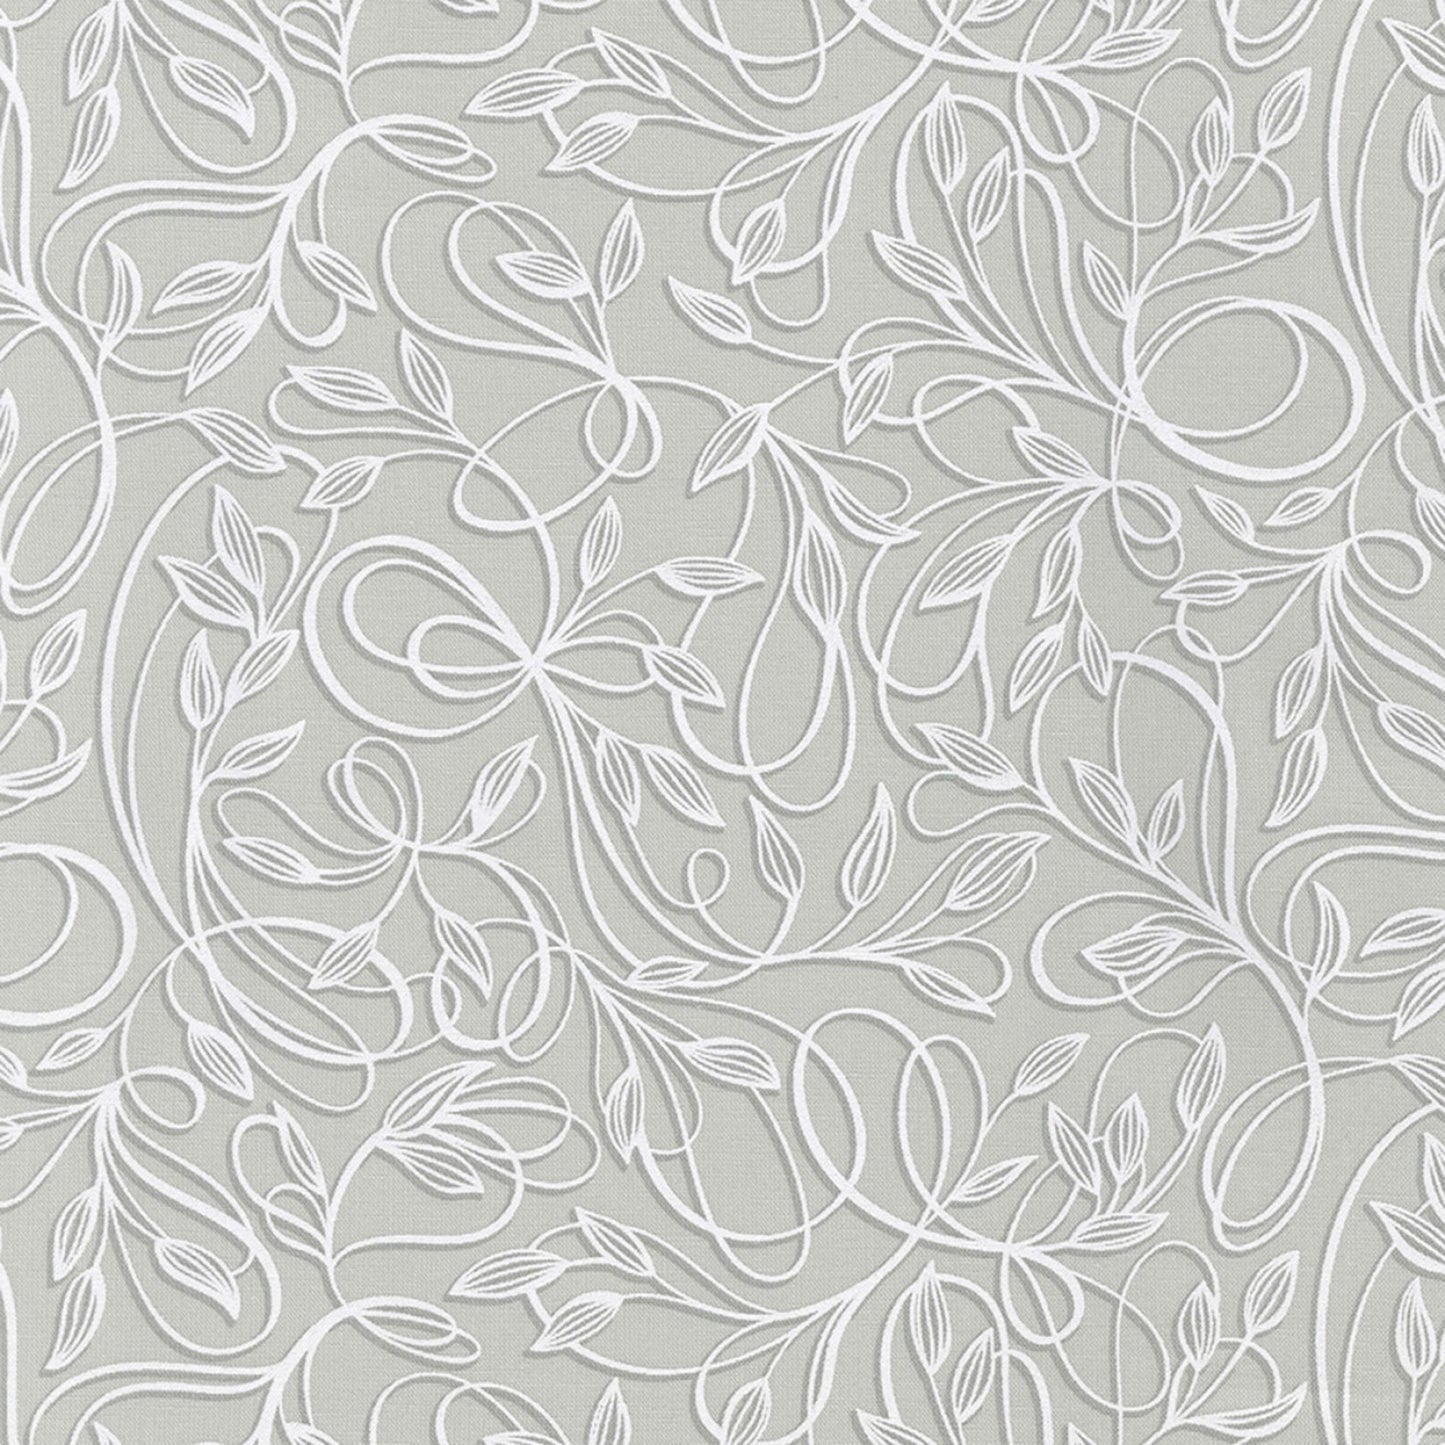 Wishwell Alabaster- Dove Leaves: Sold by the 1/2 yard.